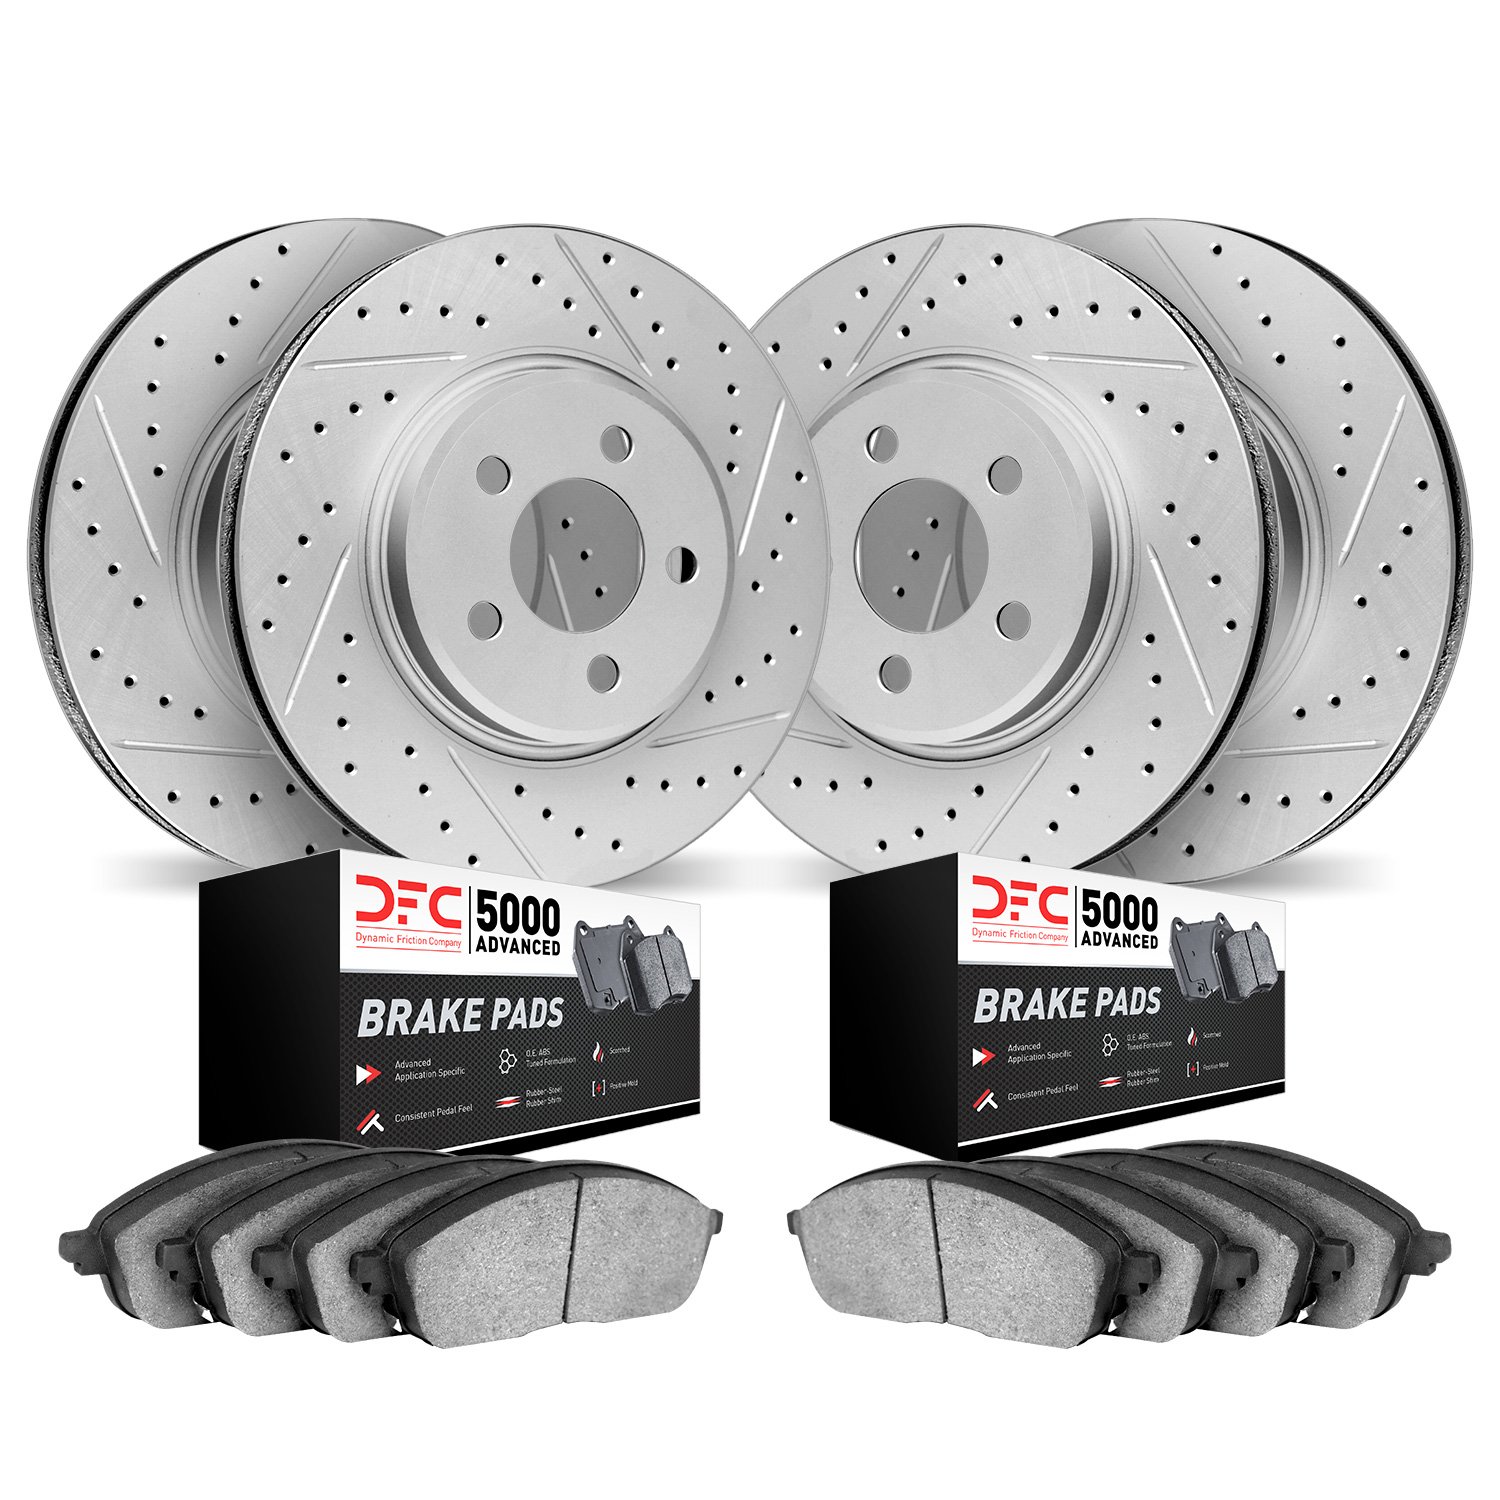 2504-31068 Geoperformance Drilled/Slotted Rotors w/5000 Advanced Brake Pads Kit, 2018-2021 BMW, Position: Front and Rear